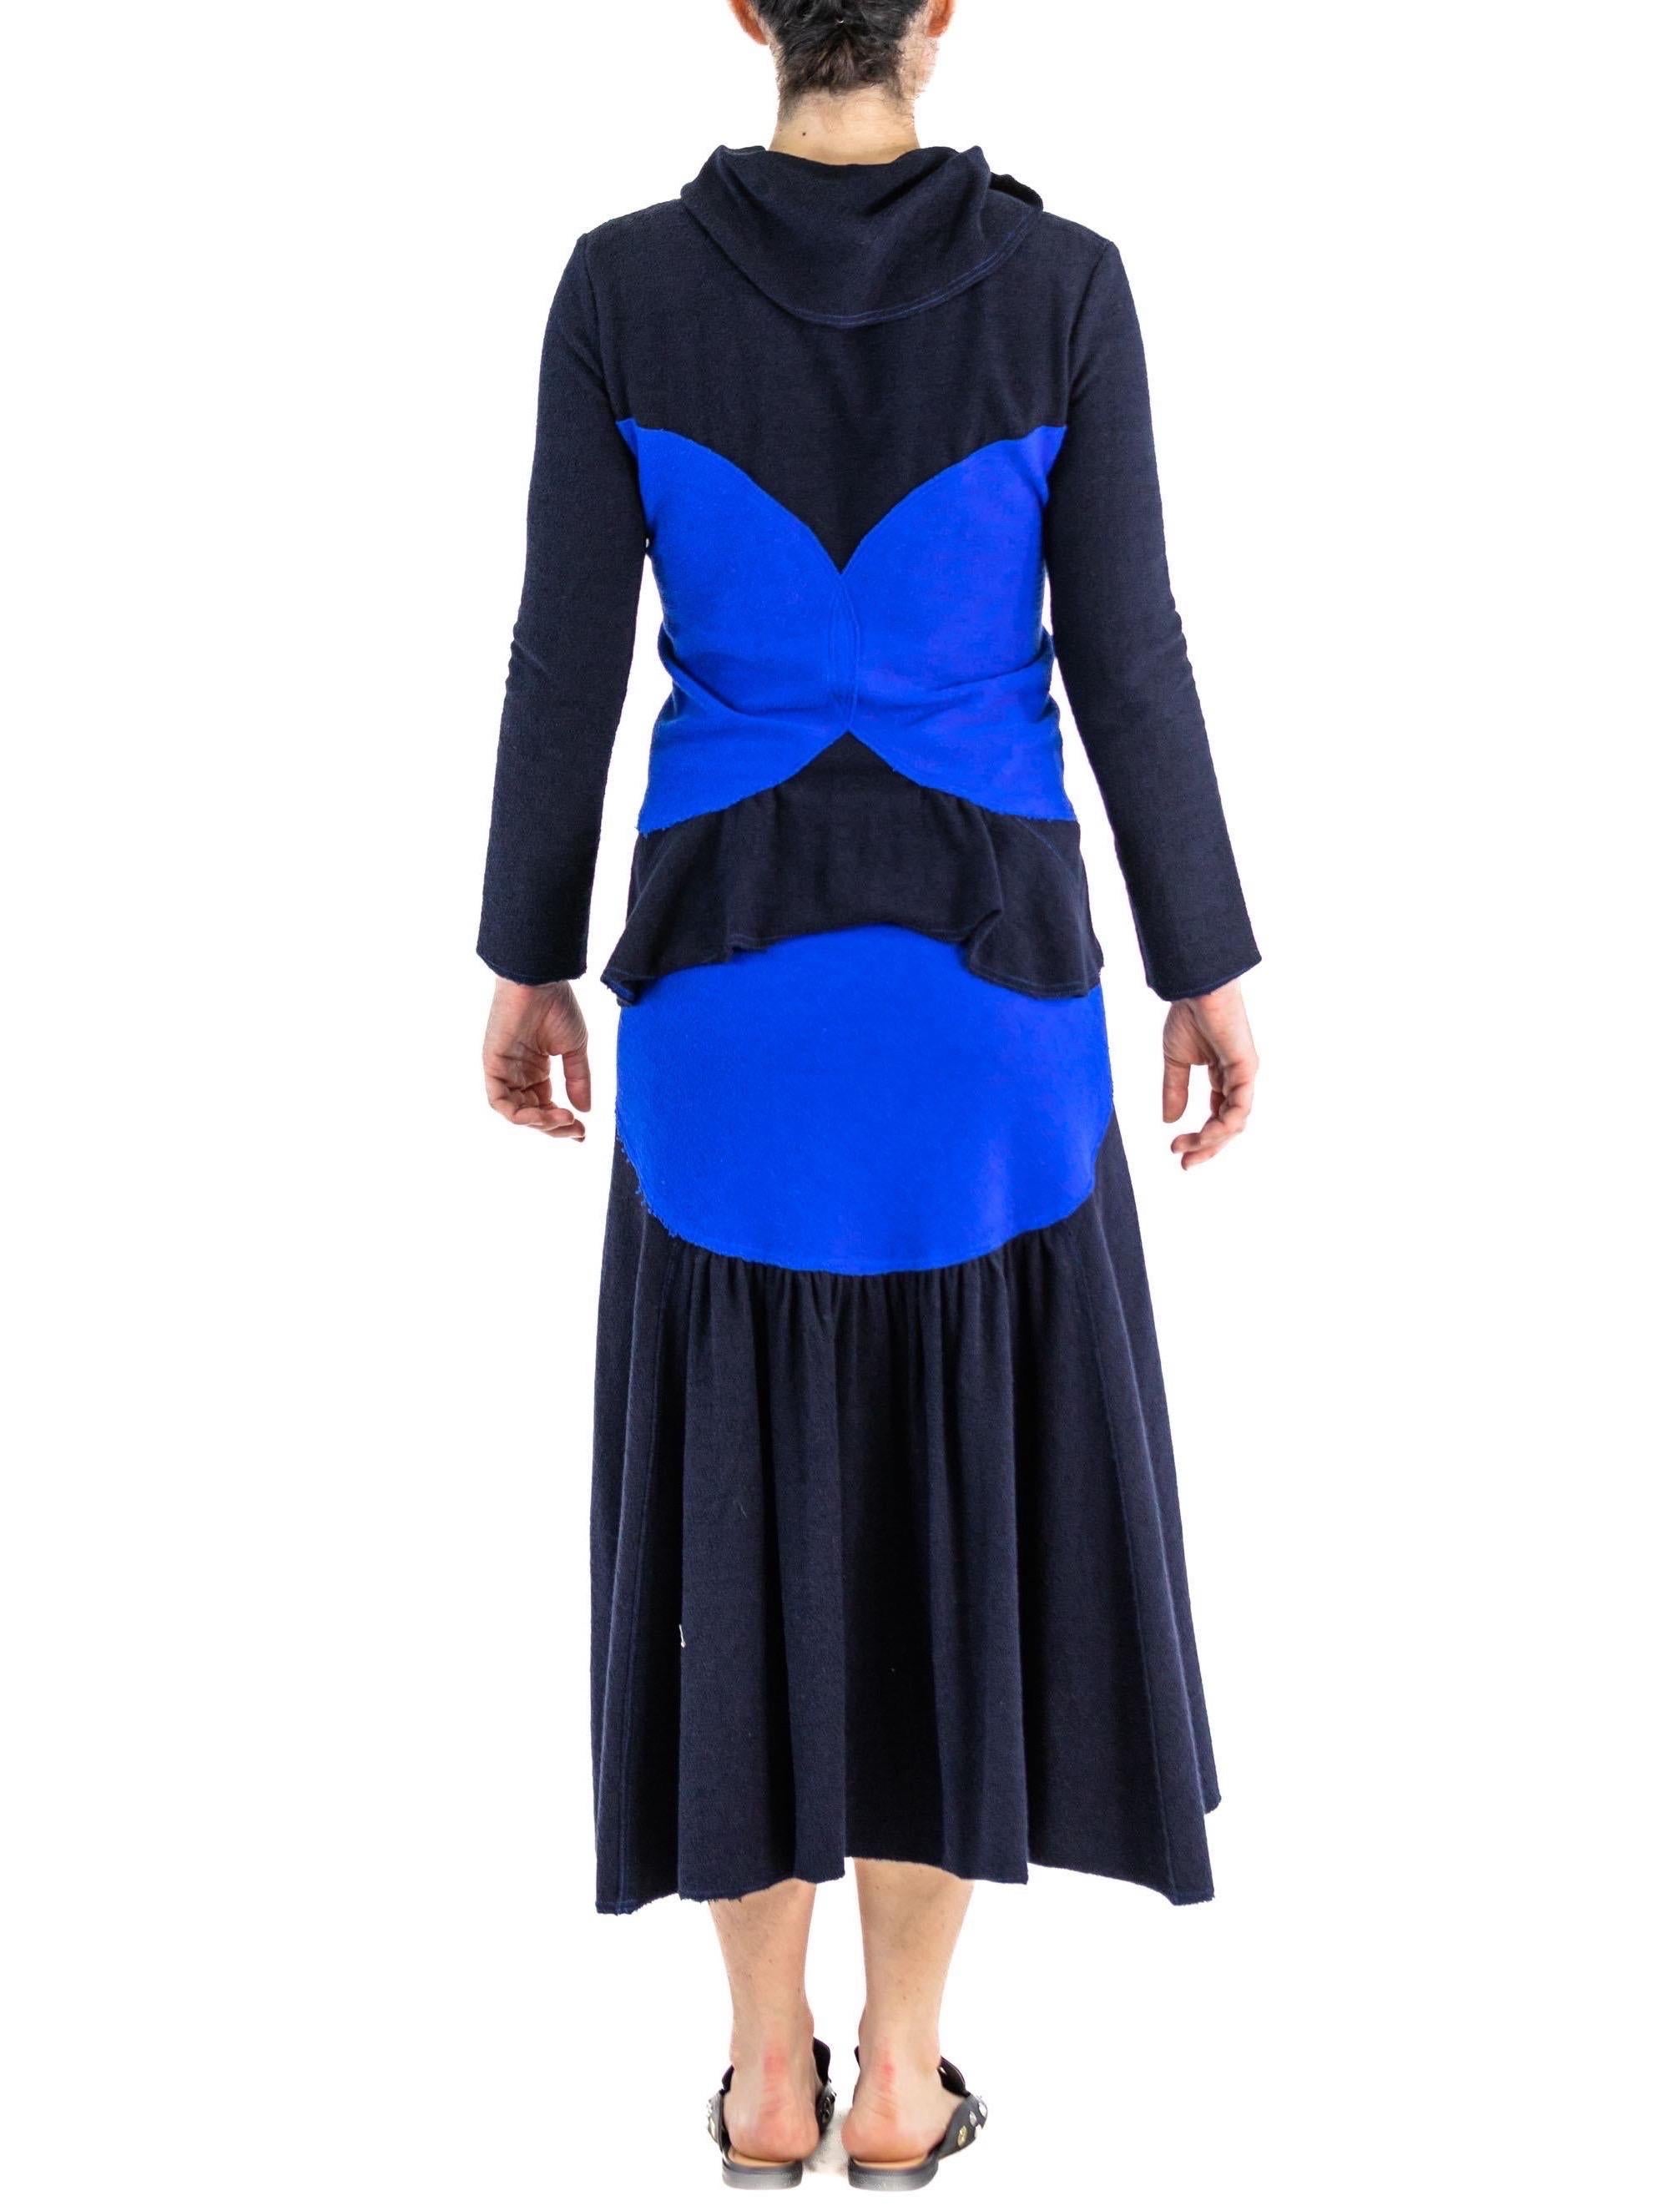 1990S ISSEY MIYAKE Cobalt Blue & Navy Cotton Terry  Colorblock Top Skirt Ensemb For Sale 5